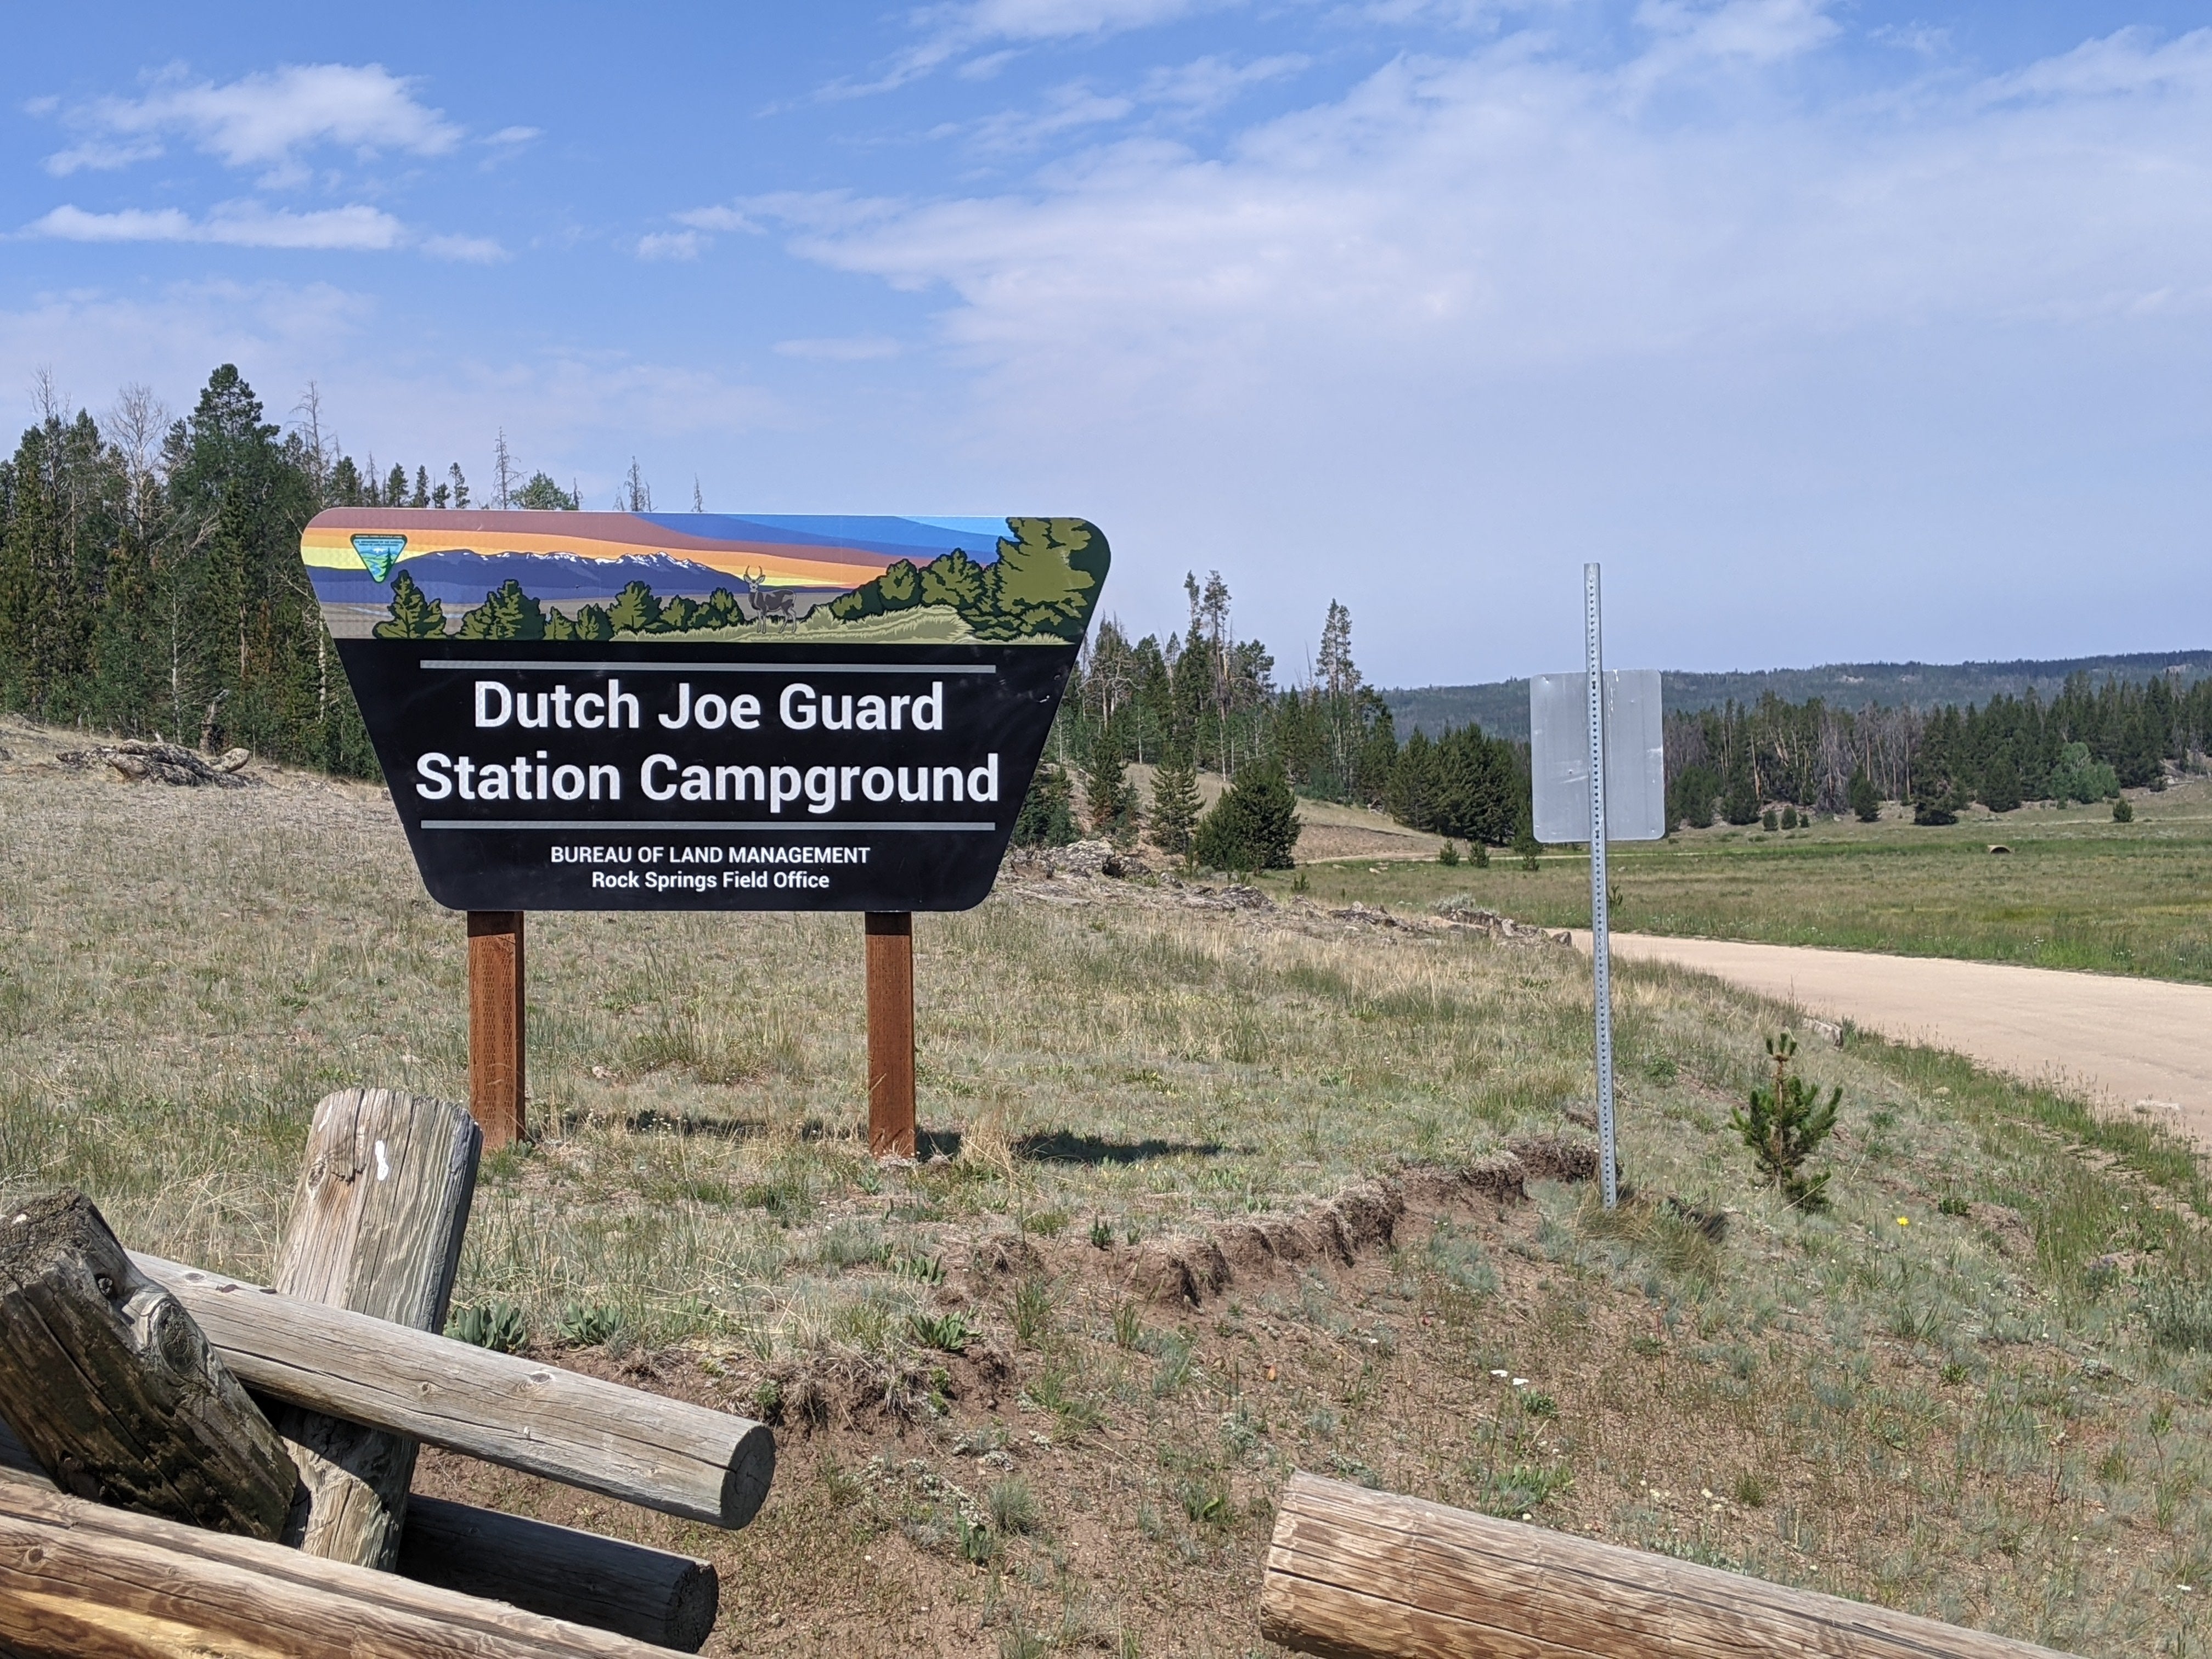 Camper submitted image from Dutch Joe Guard Station Campground - 1